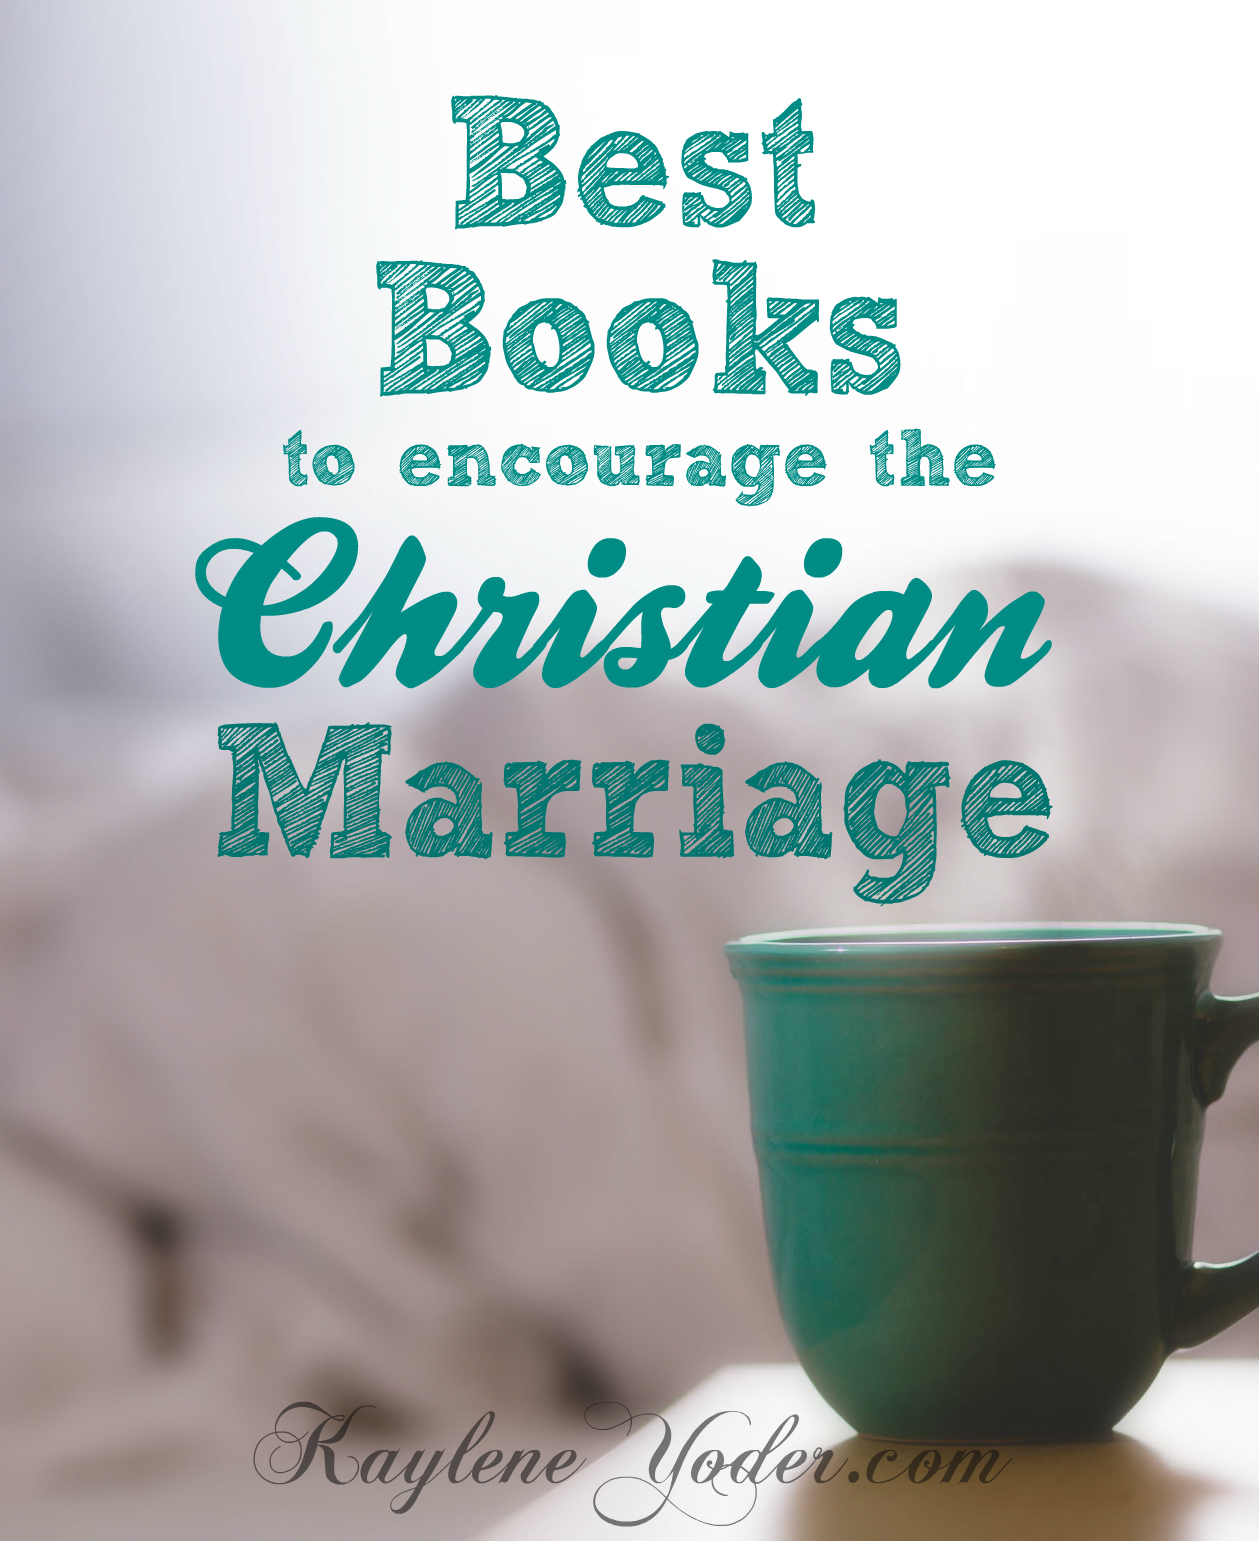 The best books to encourage your Christian marriage.